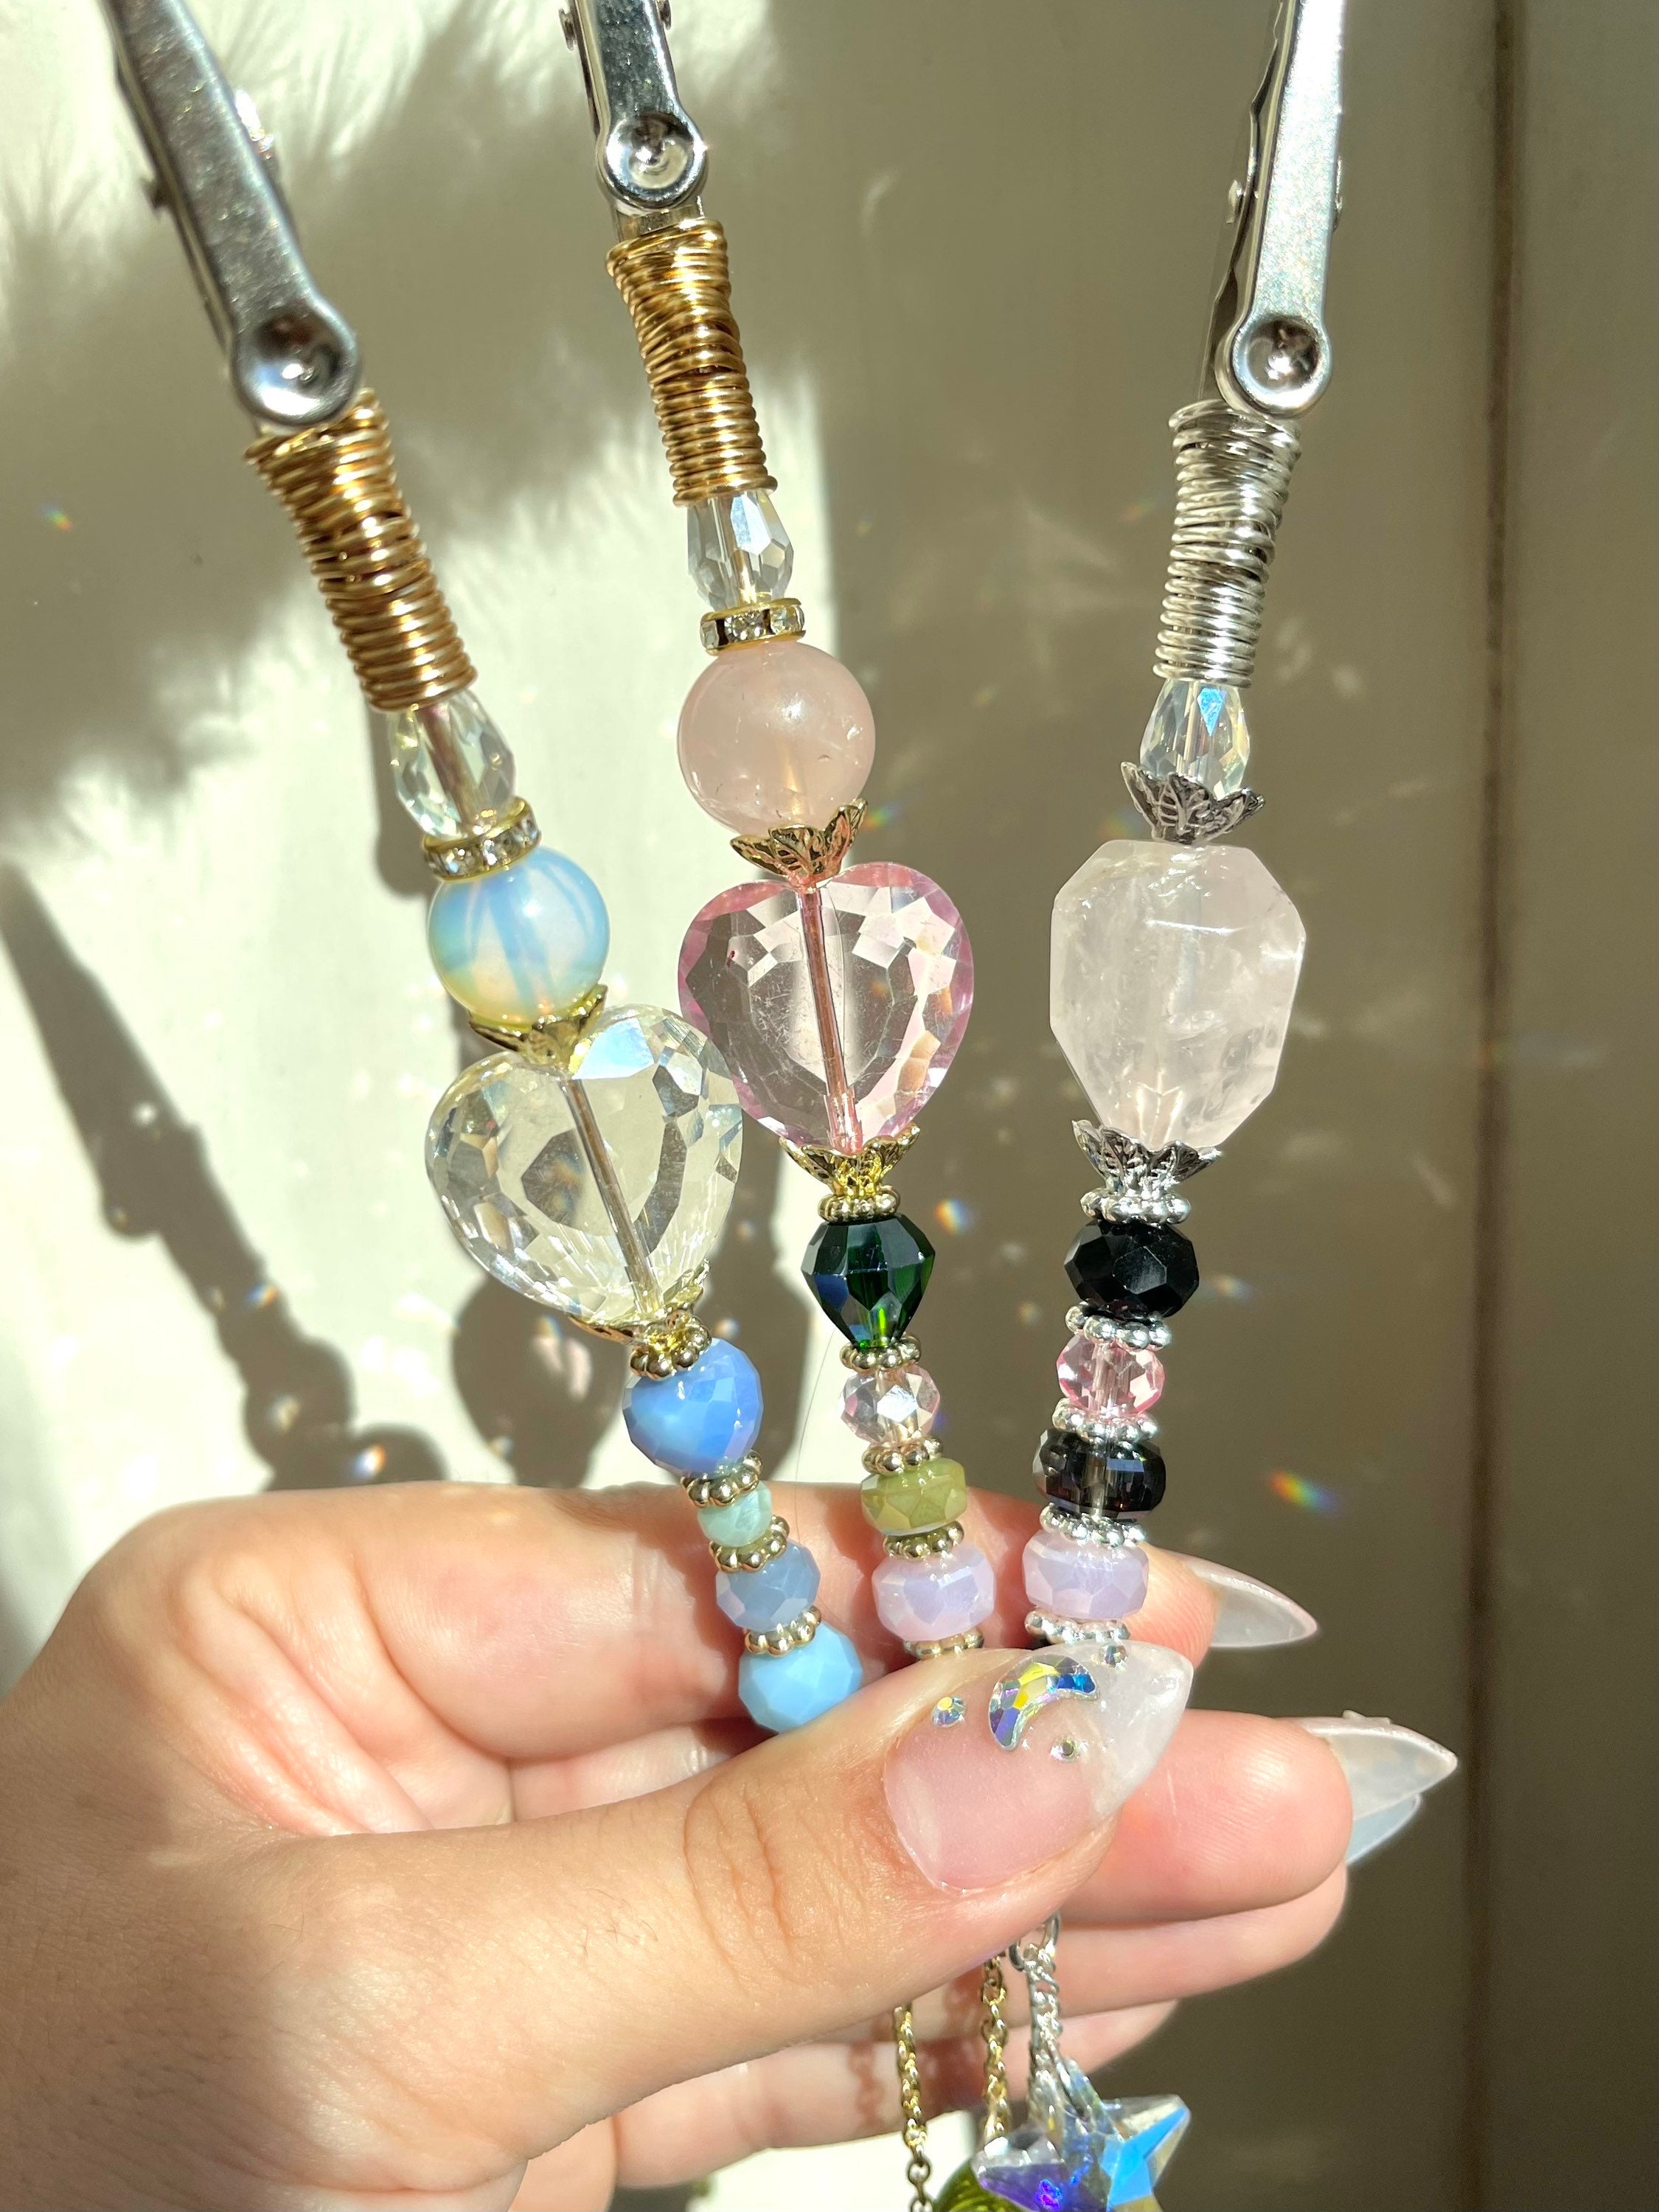 Crystals & things on X: More cute roach clips made ❤️